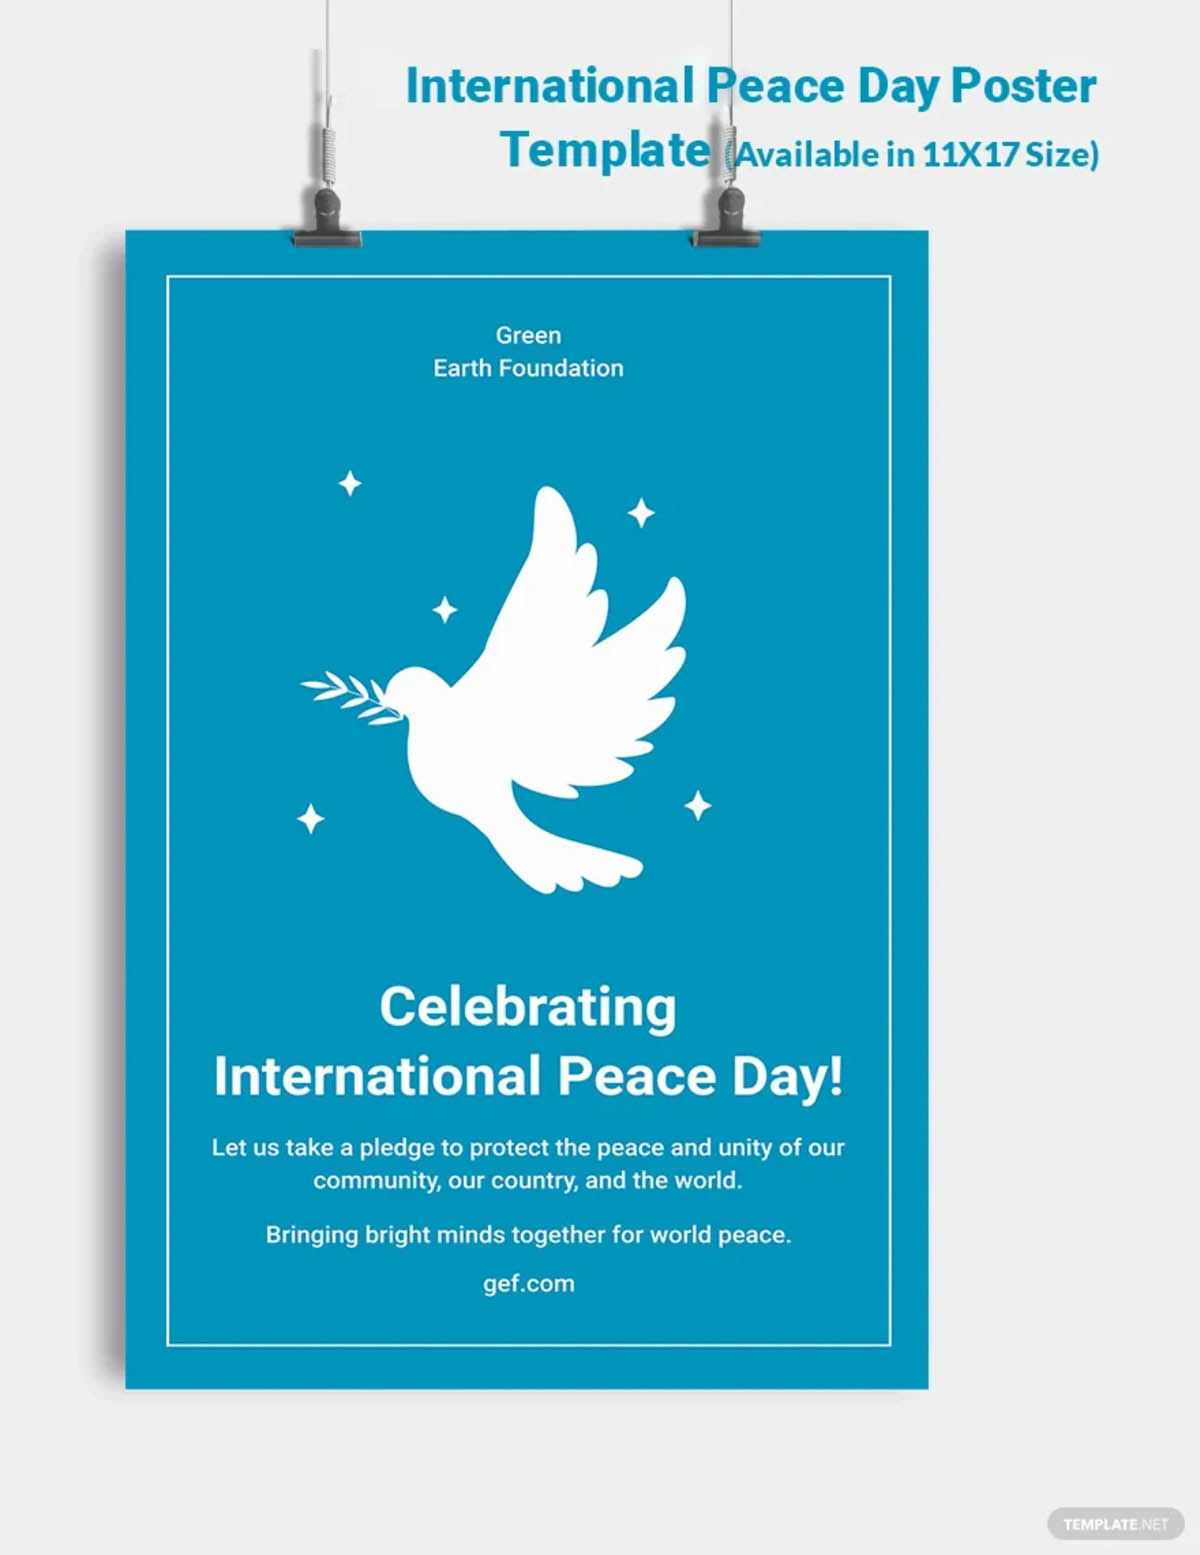 Free international peace day poster template